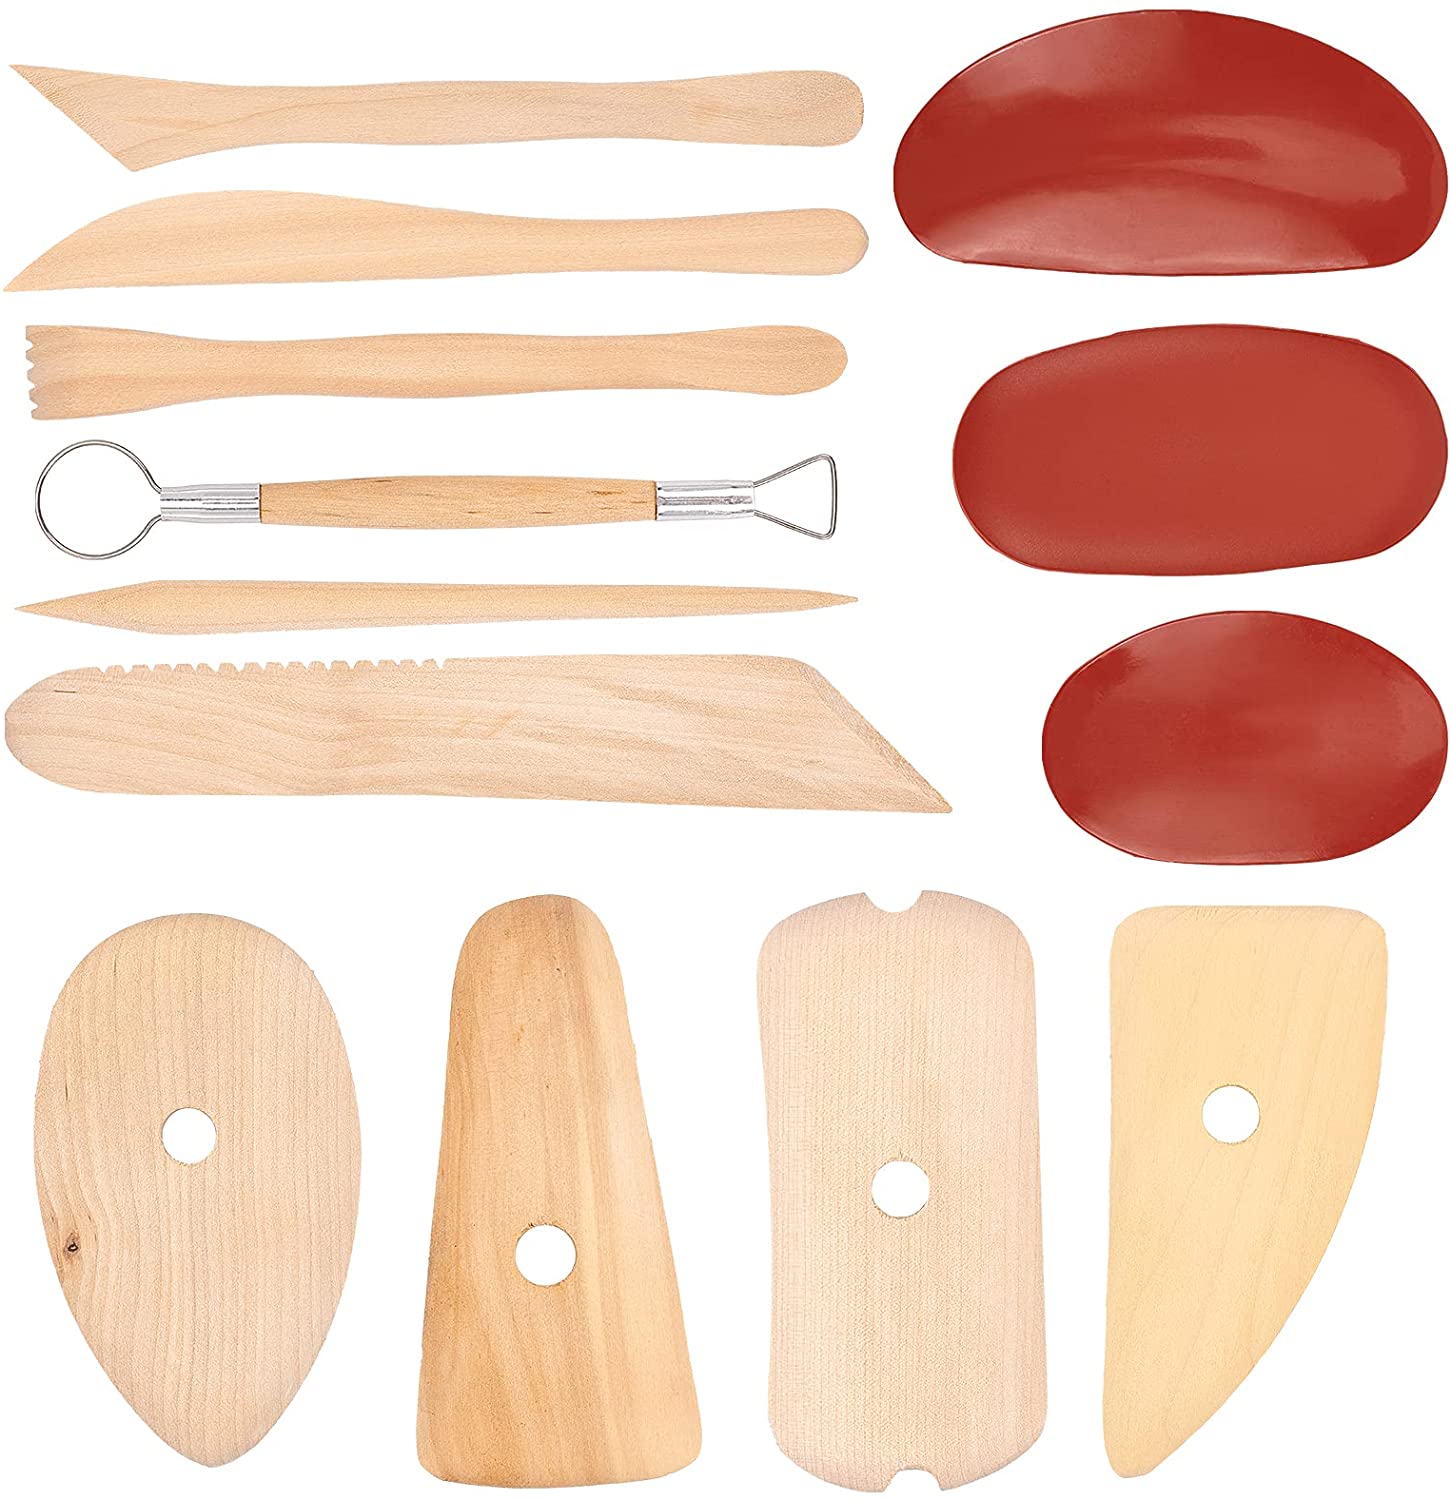 Potters Wooden Ribs Clay Pottery Modelling Set Clay Sculpture Tools for ceramics 